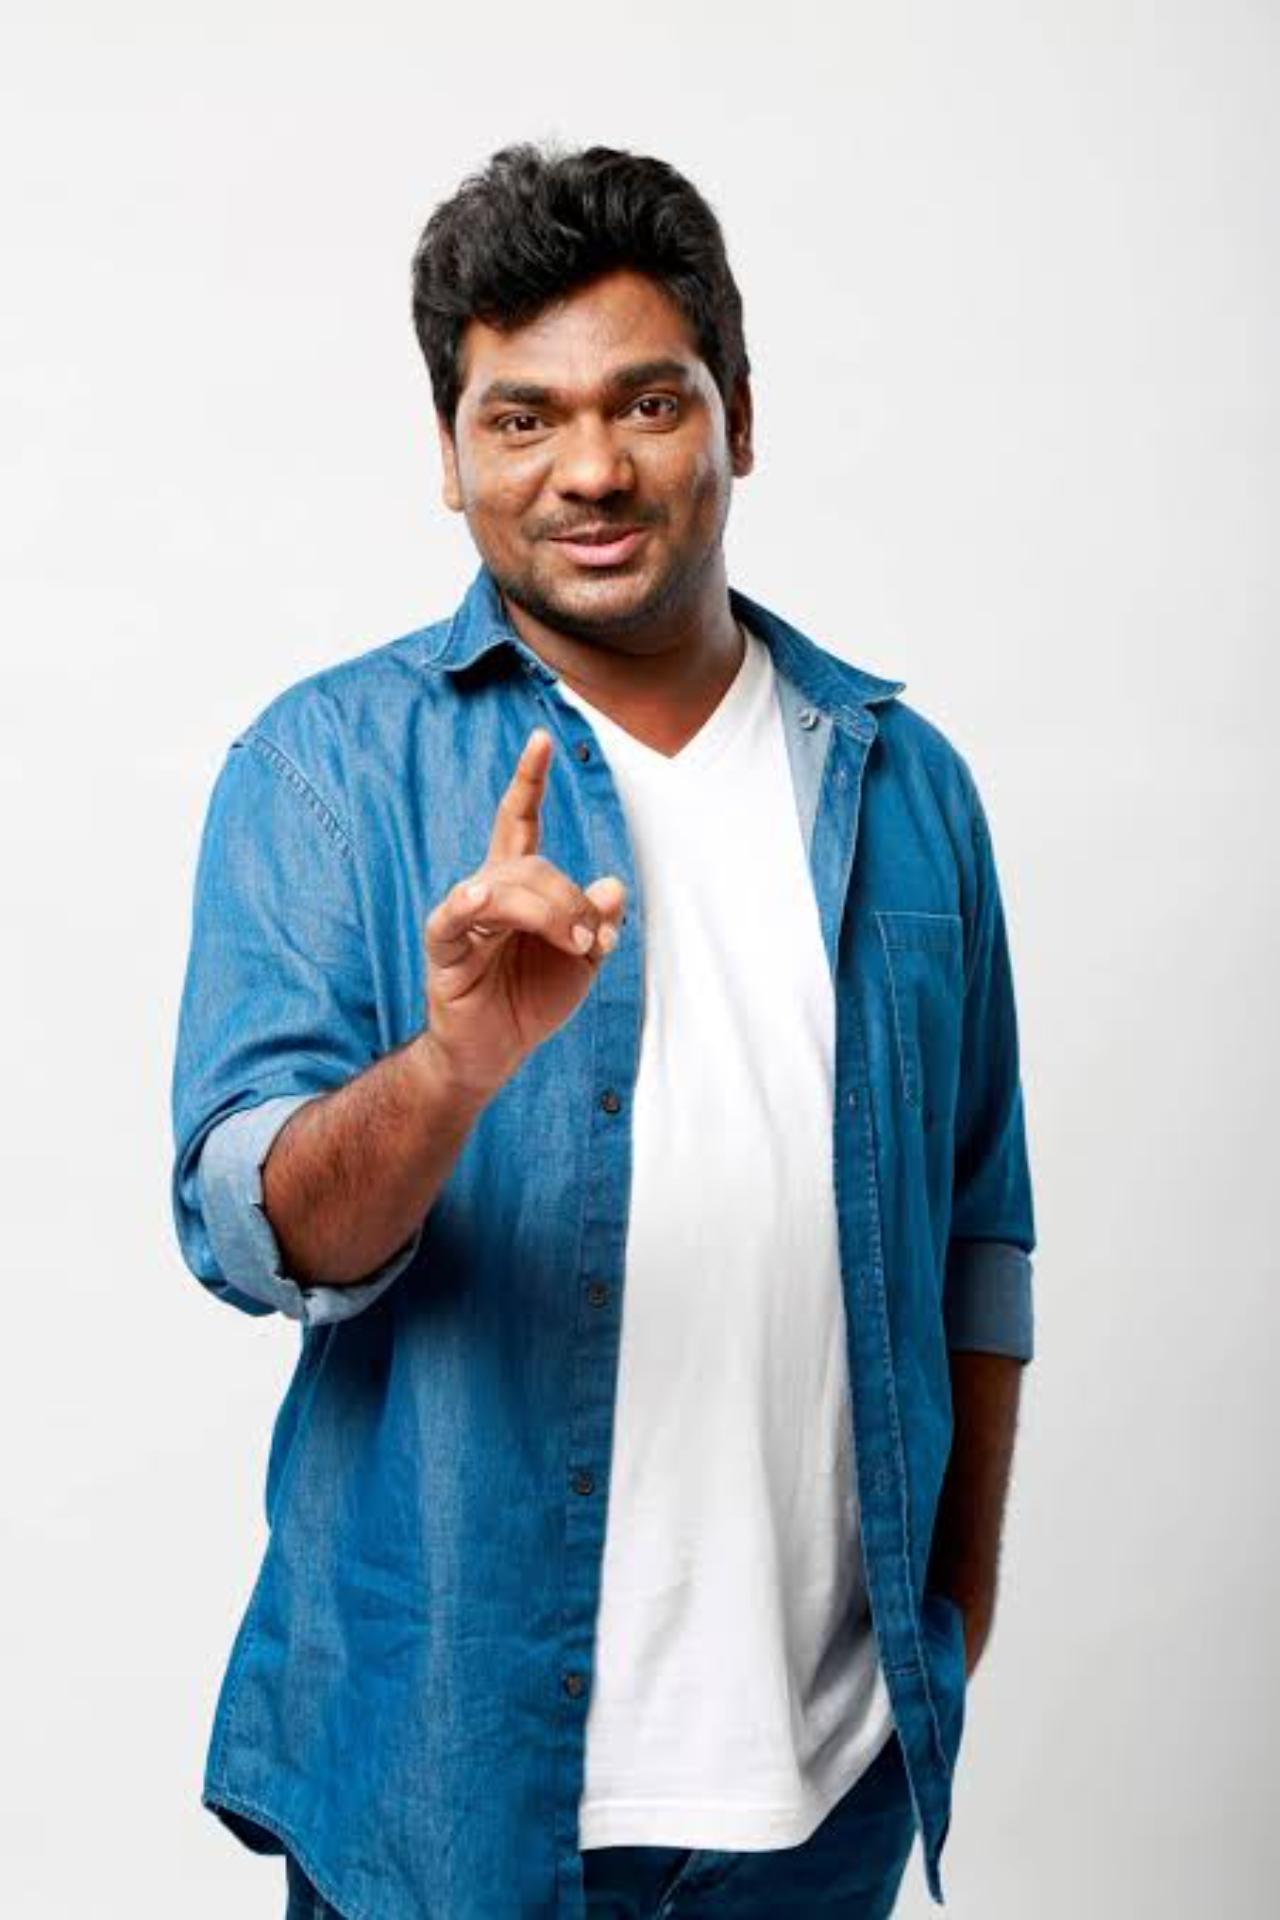 Zakir KhanZakir Khan is one of those artists who is hard to forget. It takes guts and determination to do comedy in Hindi in front of an English-speaking crowd and be successful as well. And he does it with ease. His Urdu clad hindi has always been smooth and effortless. He has epitomised the phrase sakht launda